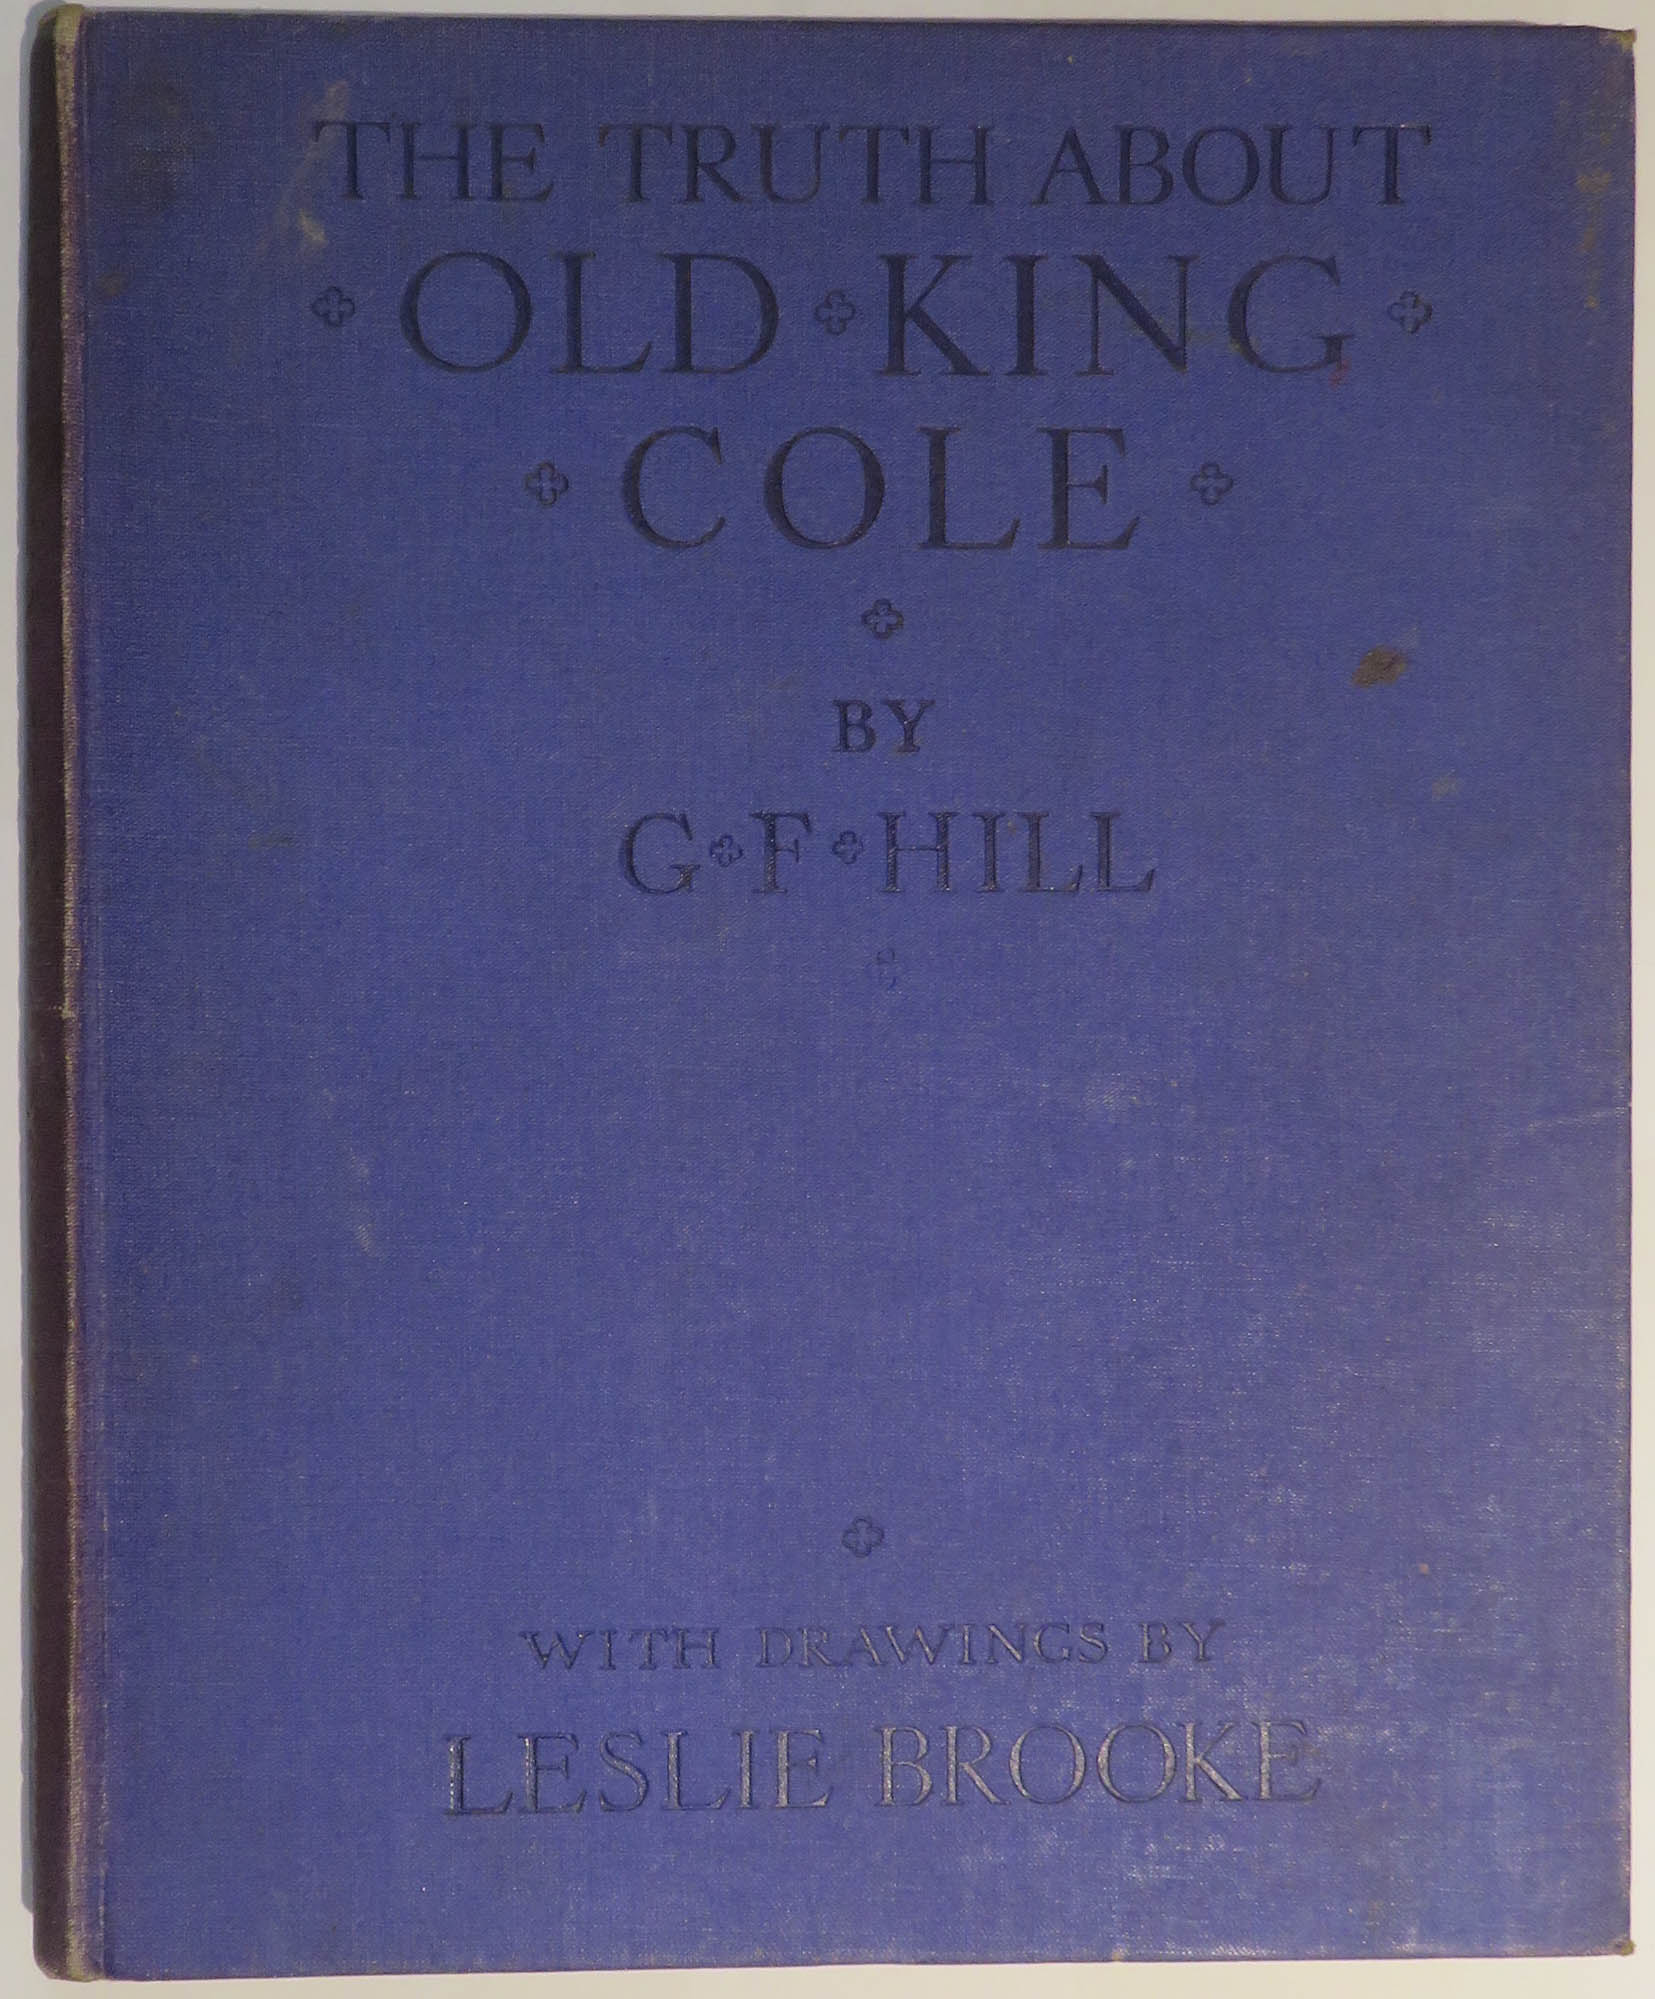 The Truth About Old King Cole